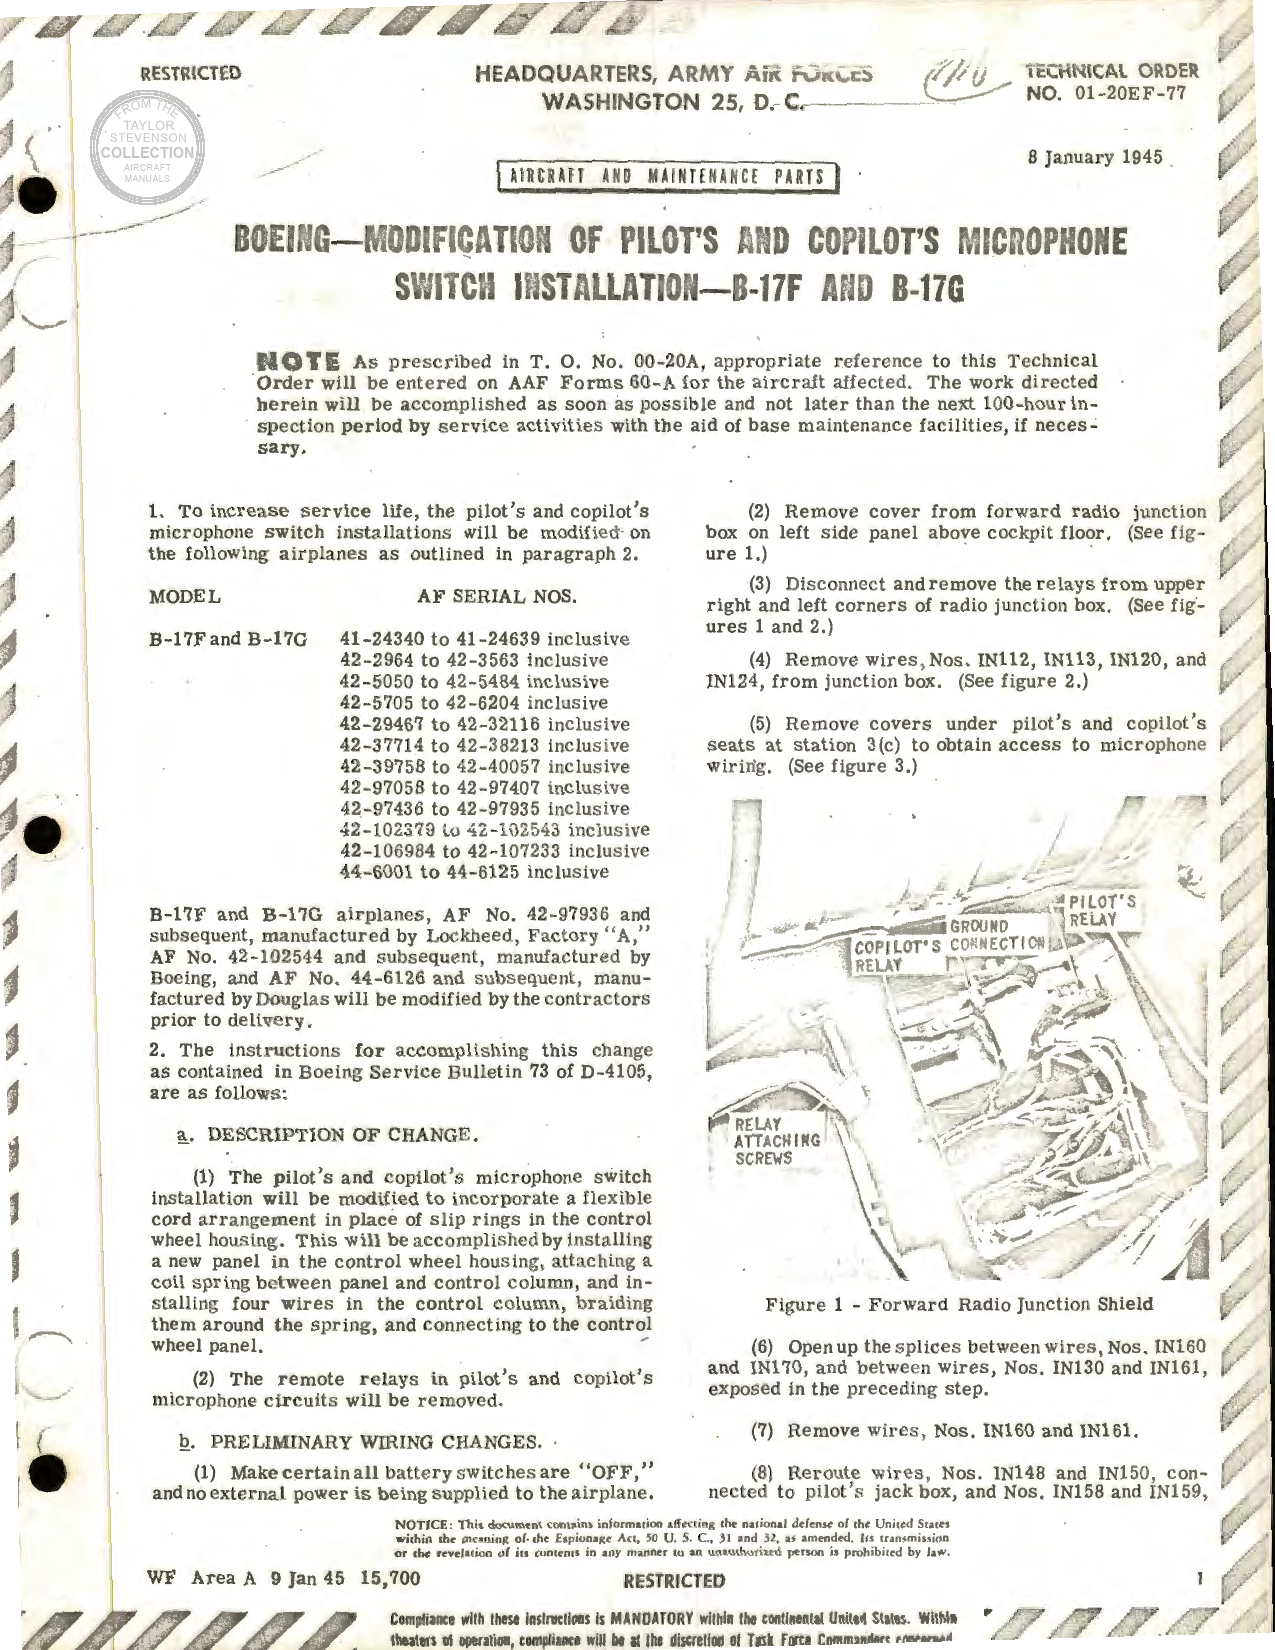 Sample page 1 from AirCorps Library document: Modification of Pilot's and Copilot's Microphone Switch Installation for B-17F and B-17G